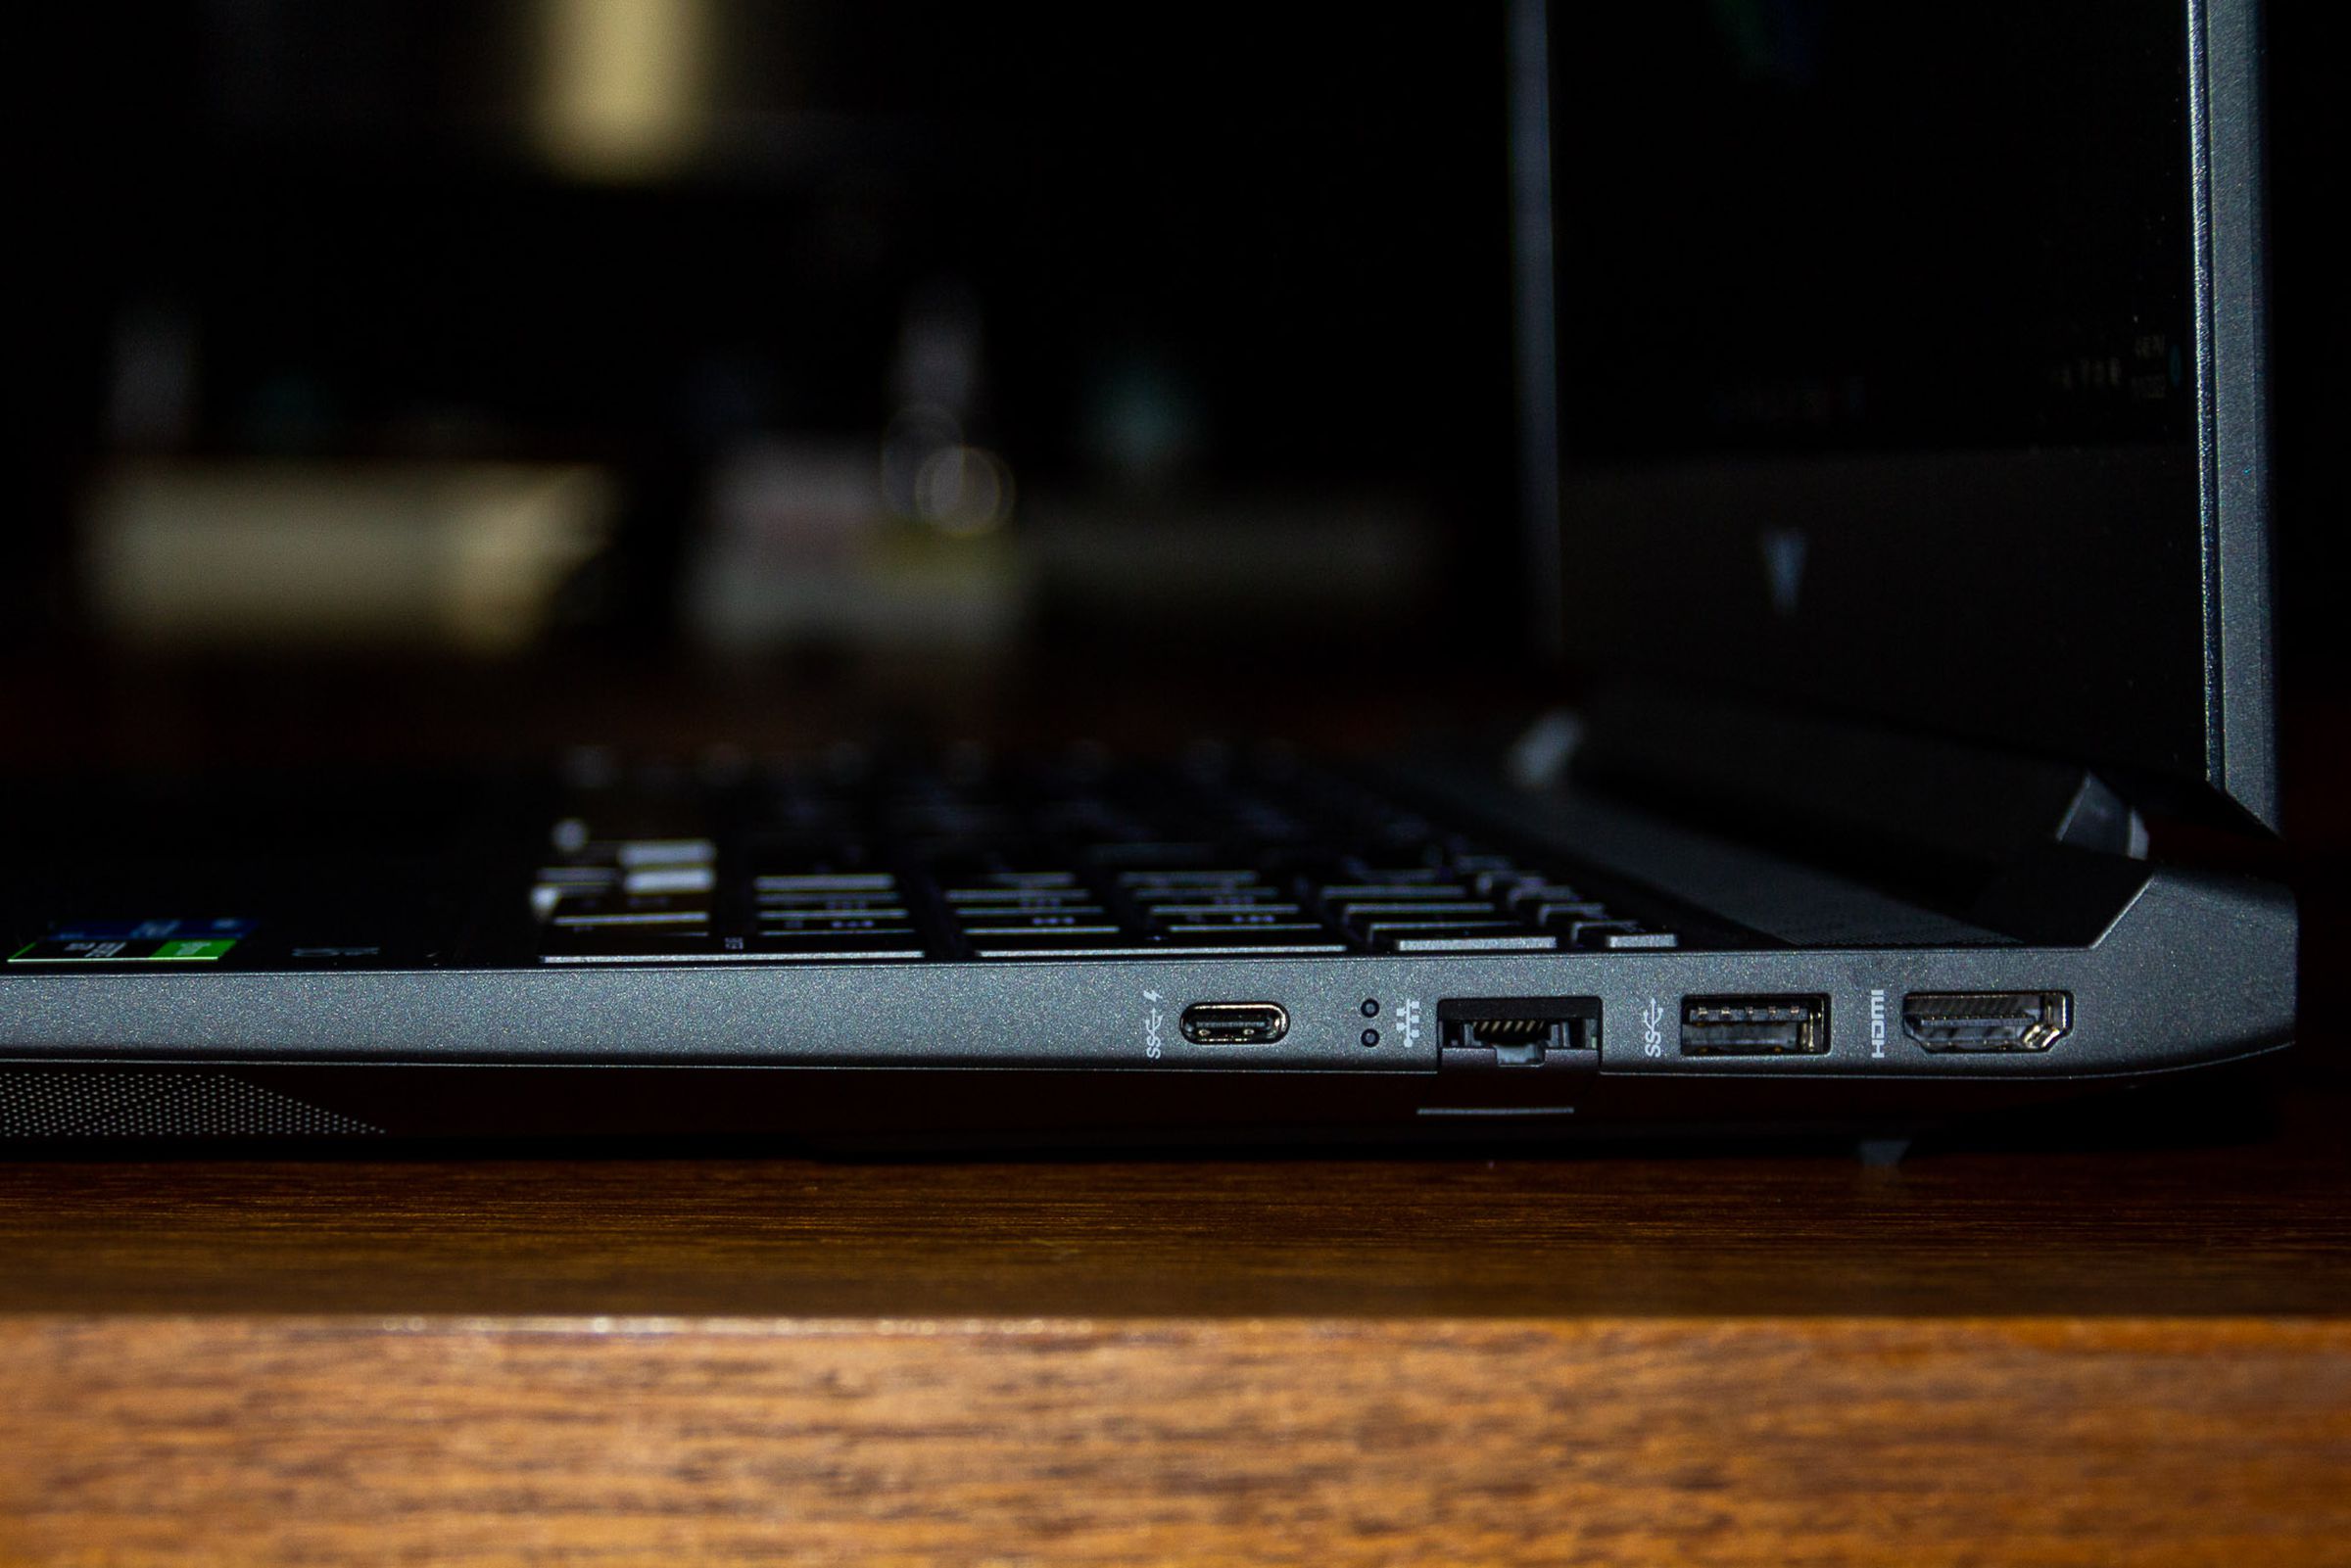 The ports on the right side of the HP Victus 15.